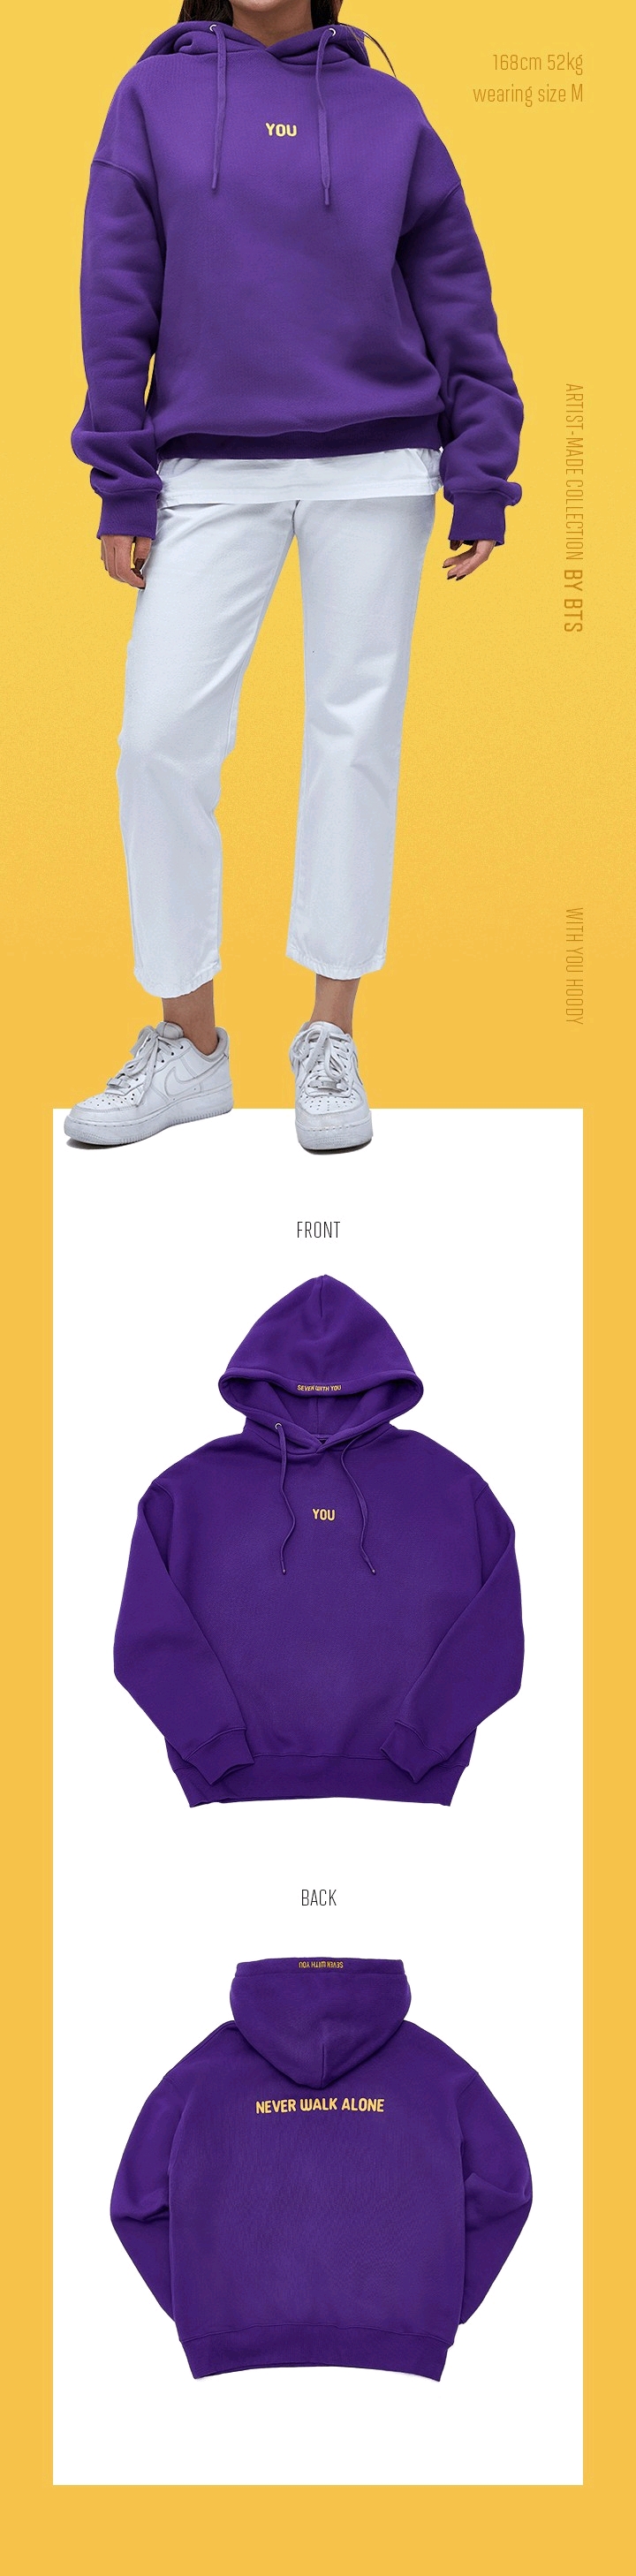 Jimin With You Hoodie - BTS Official Merch | BTS Merchandise